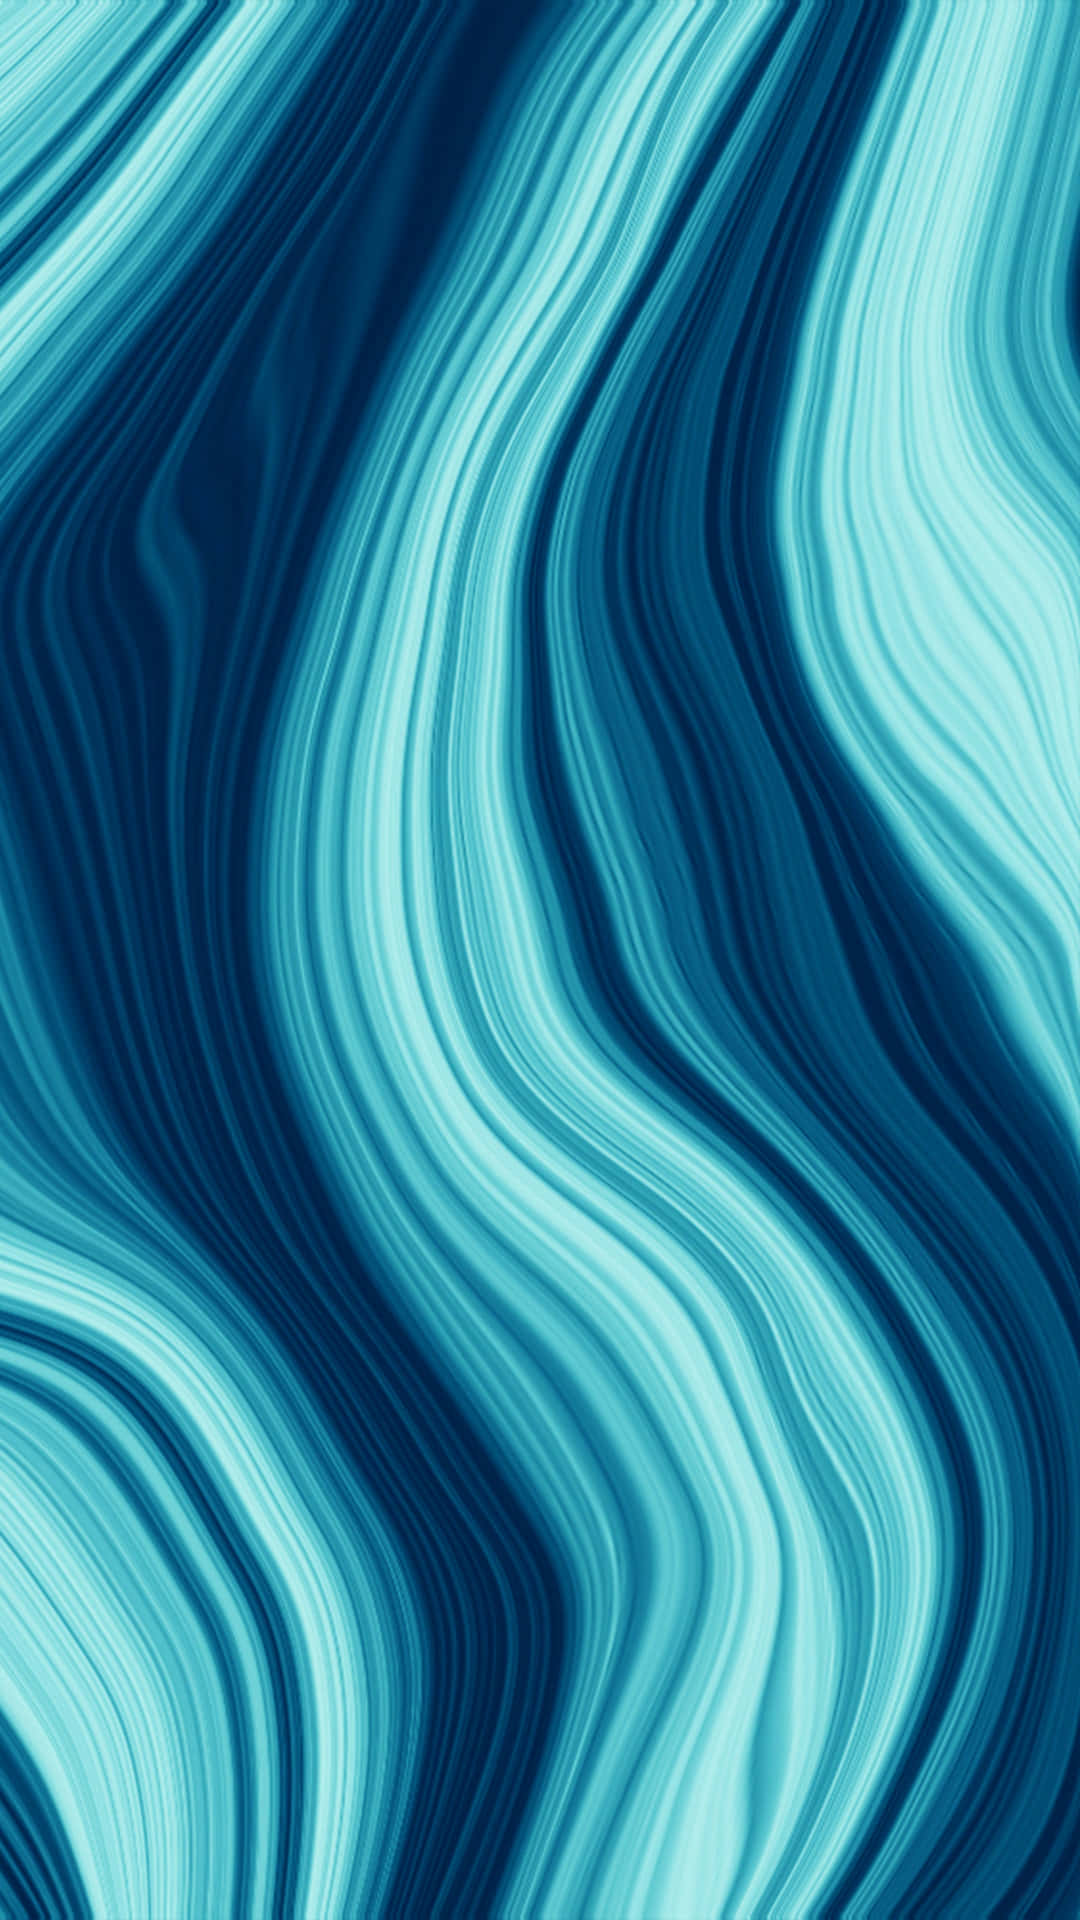 A Blue And White Wave Pattern